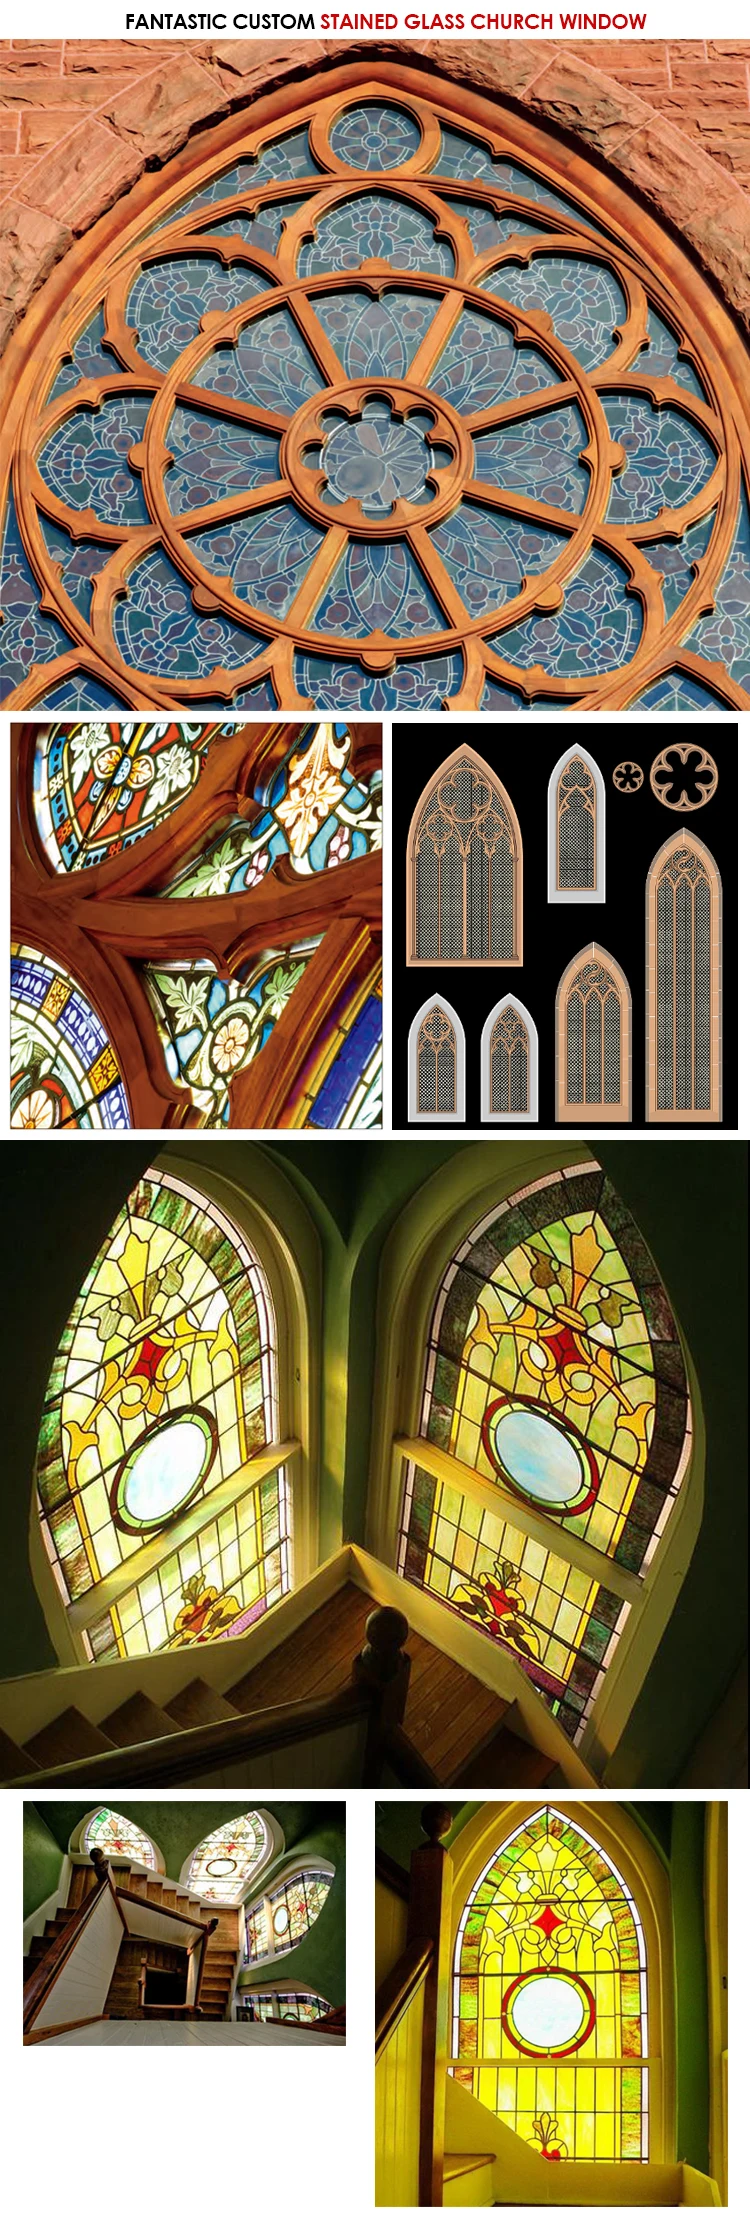 New York best selling wooden double glazed windows with stained glass